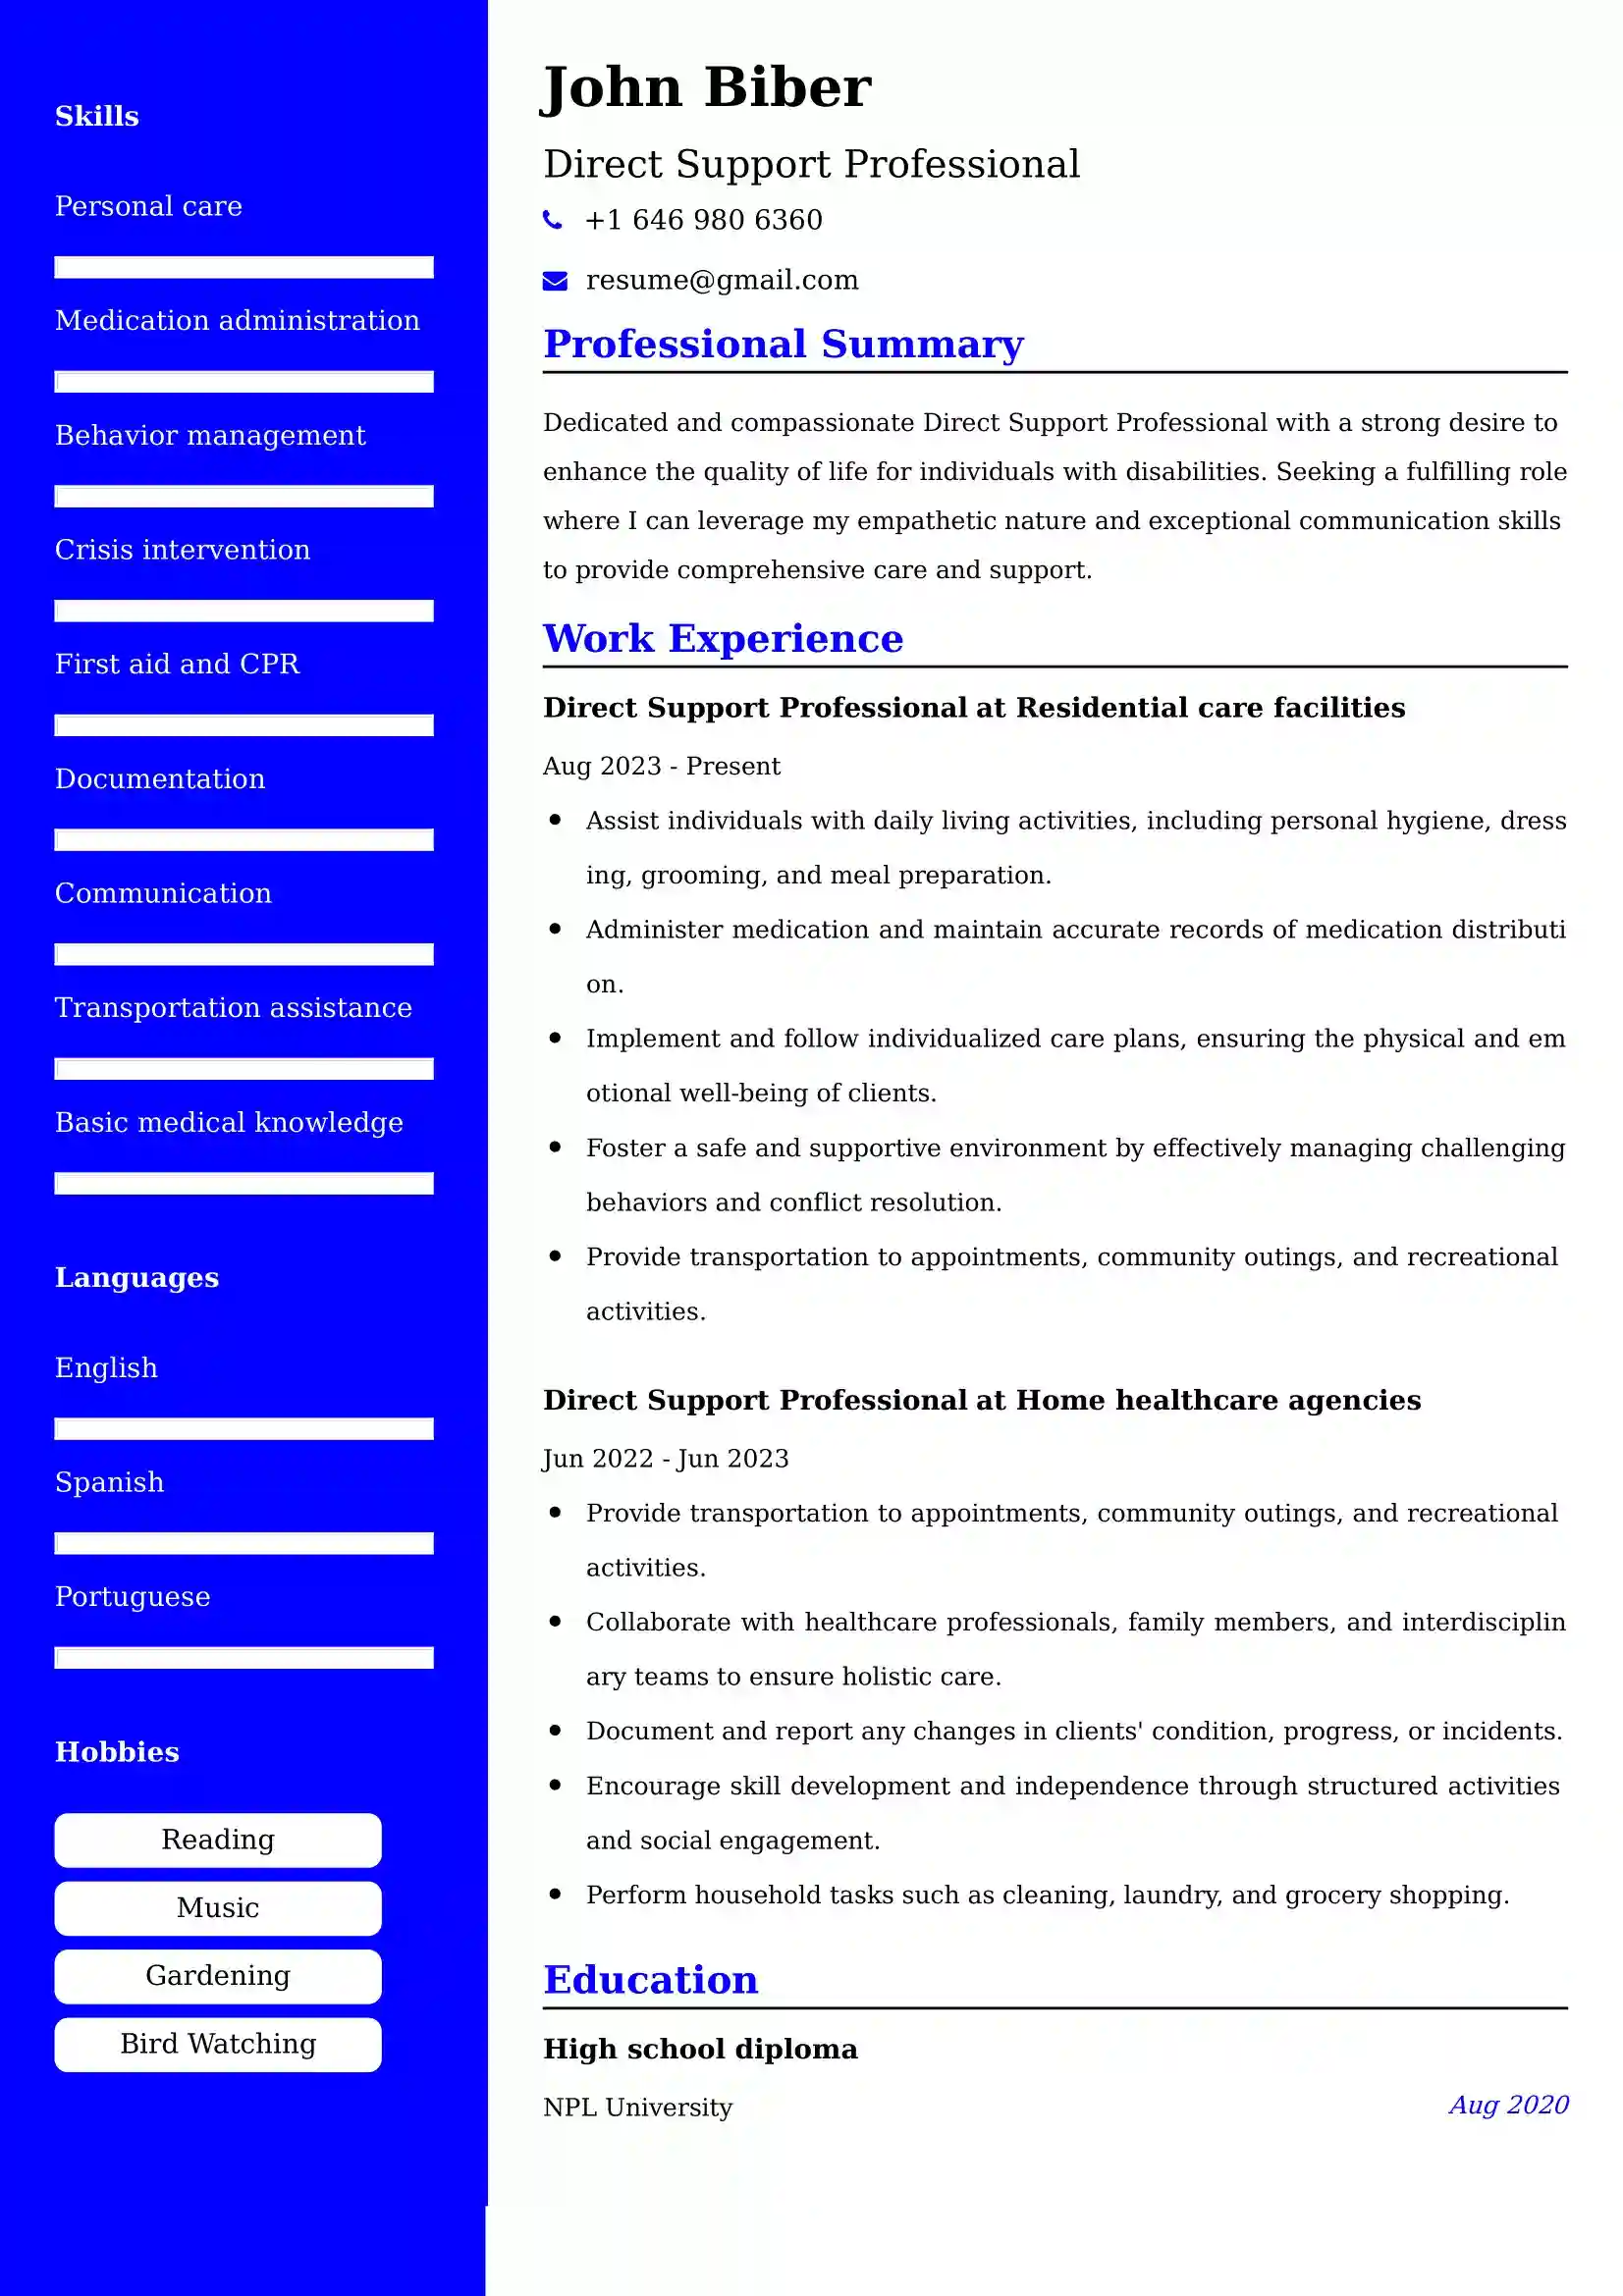 Direct Support Professional Resume Examples India